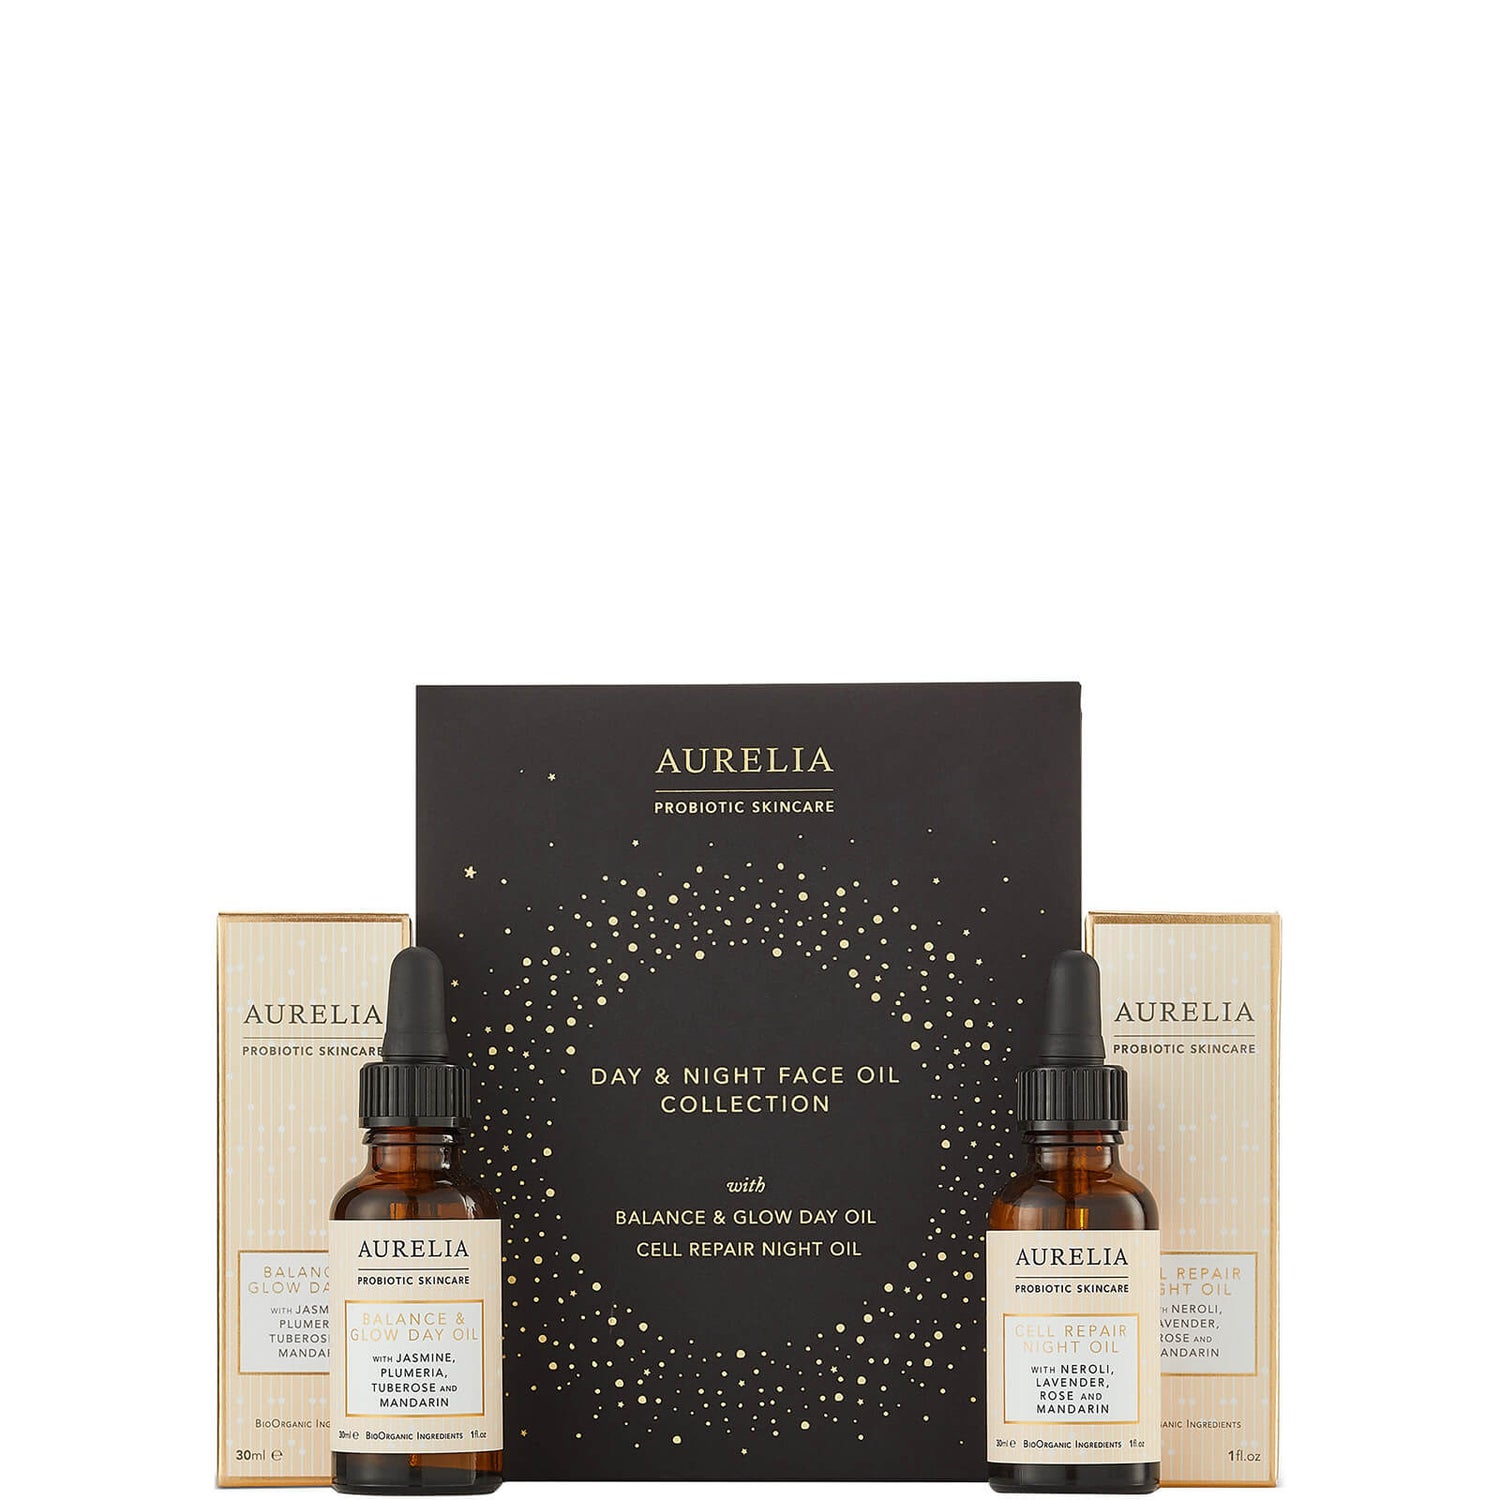 Aurelia Probiotic Skincare Day and Night Oil Collection 60ml (Worth £76.00)